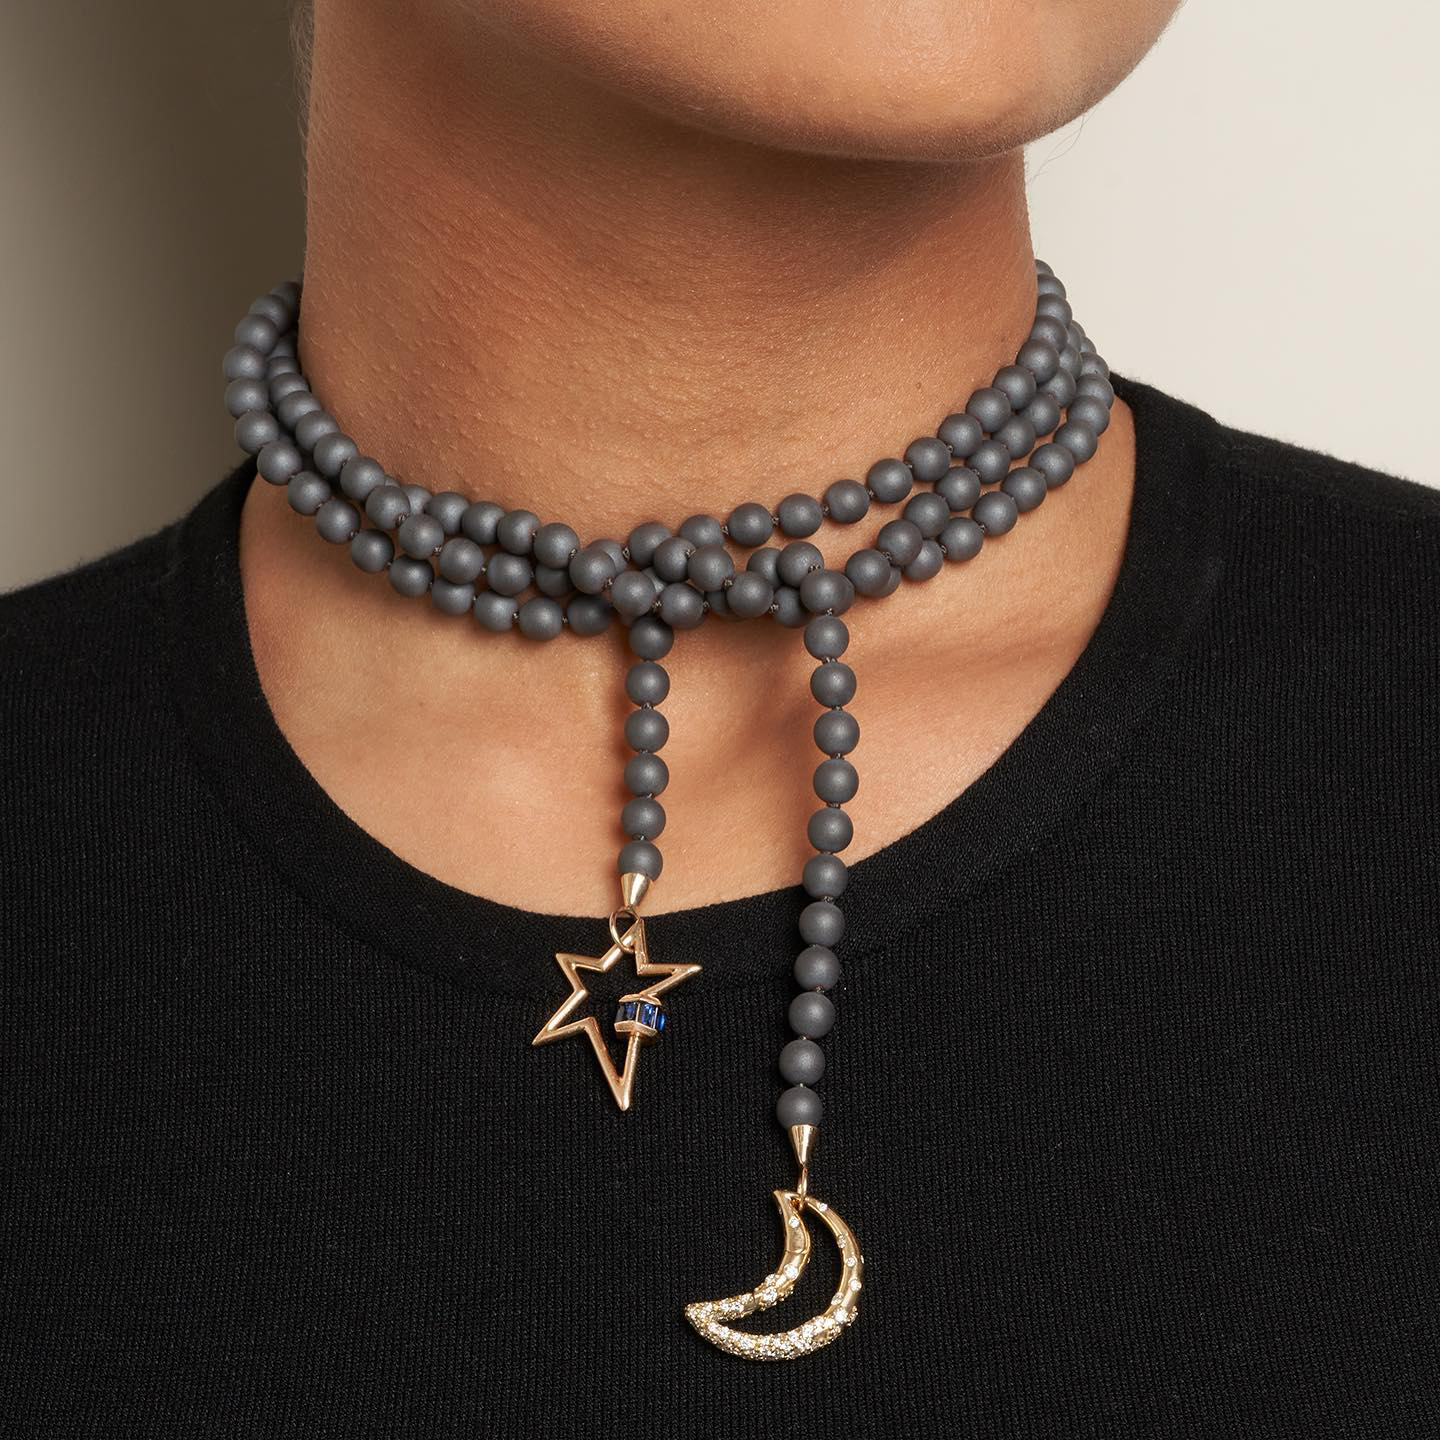 Close up of woman's decolletage wearing necklace with moon charm and star lock charm